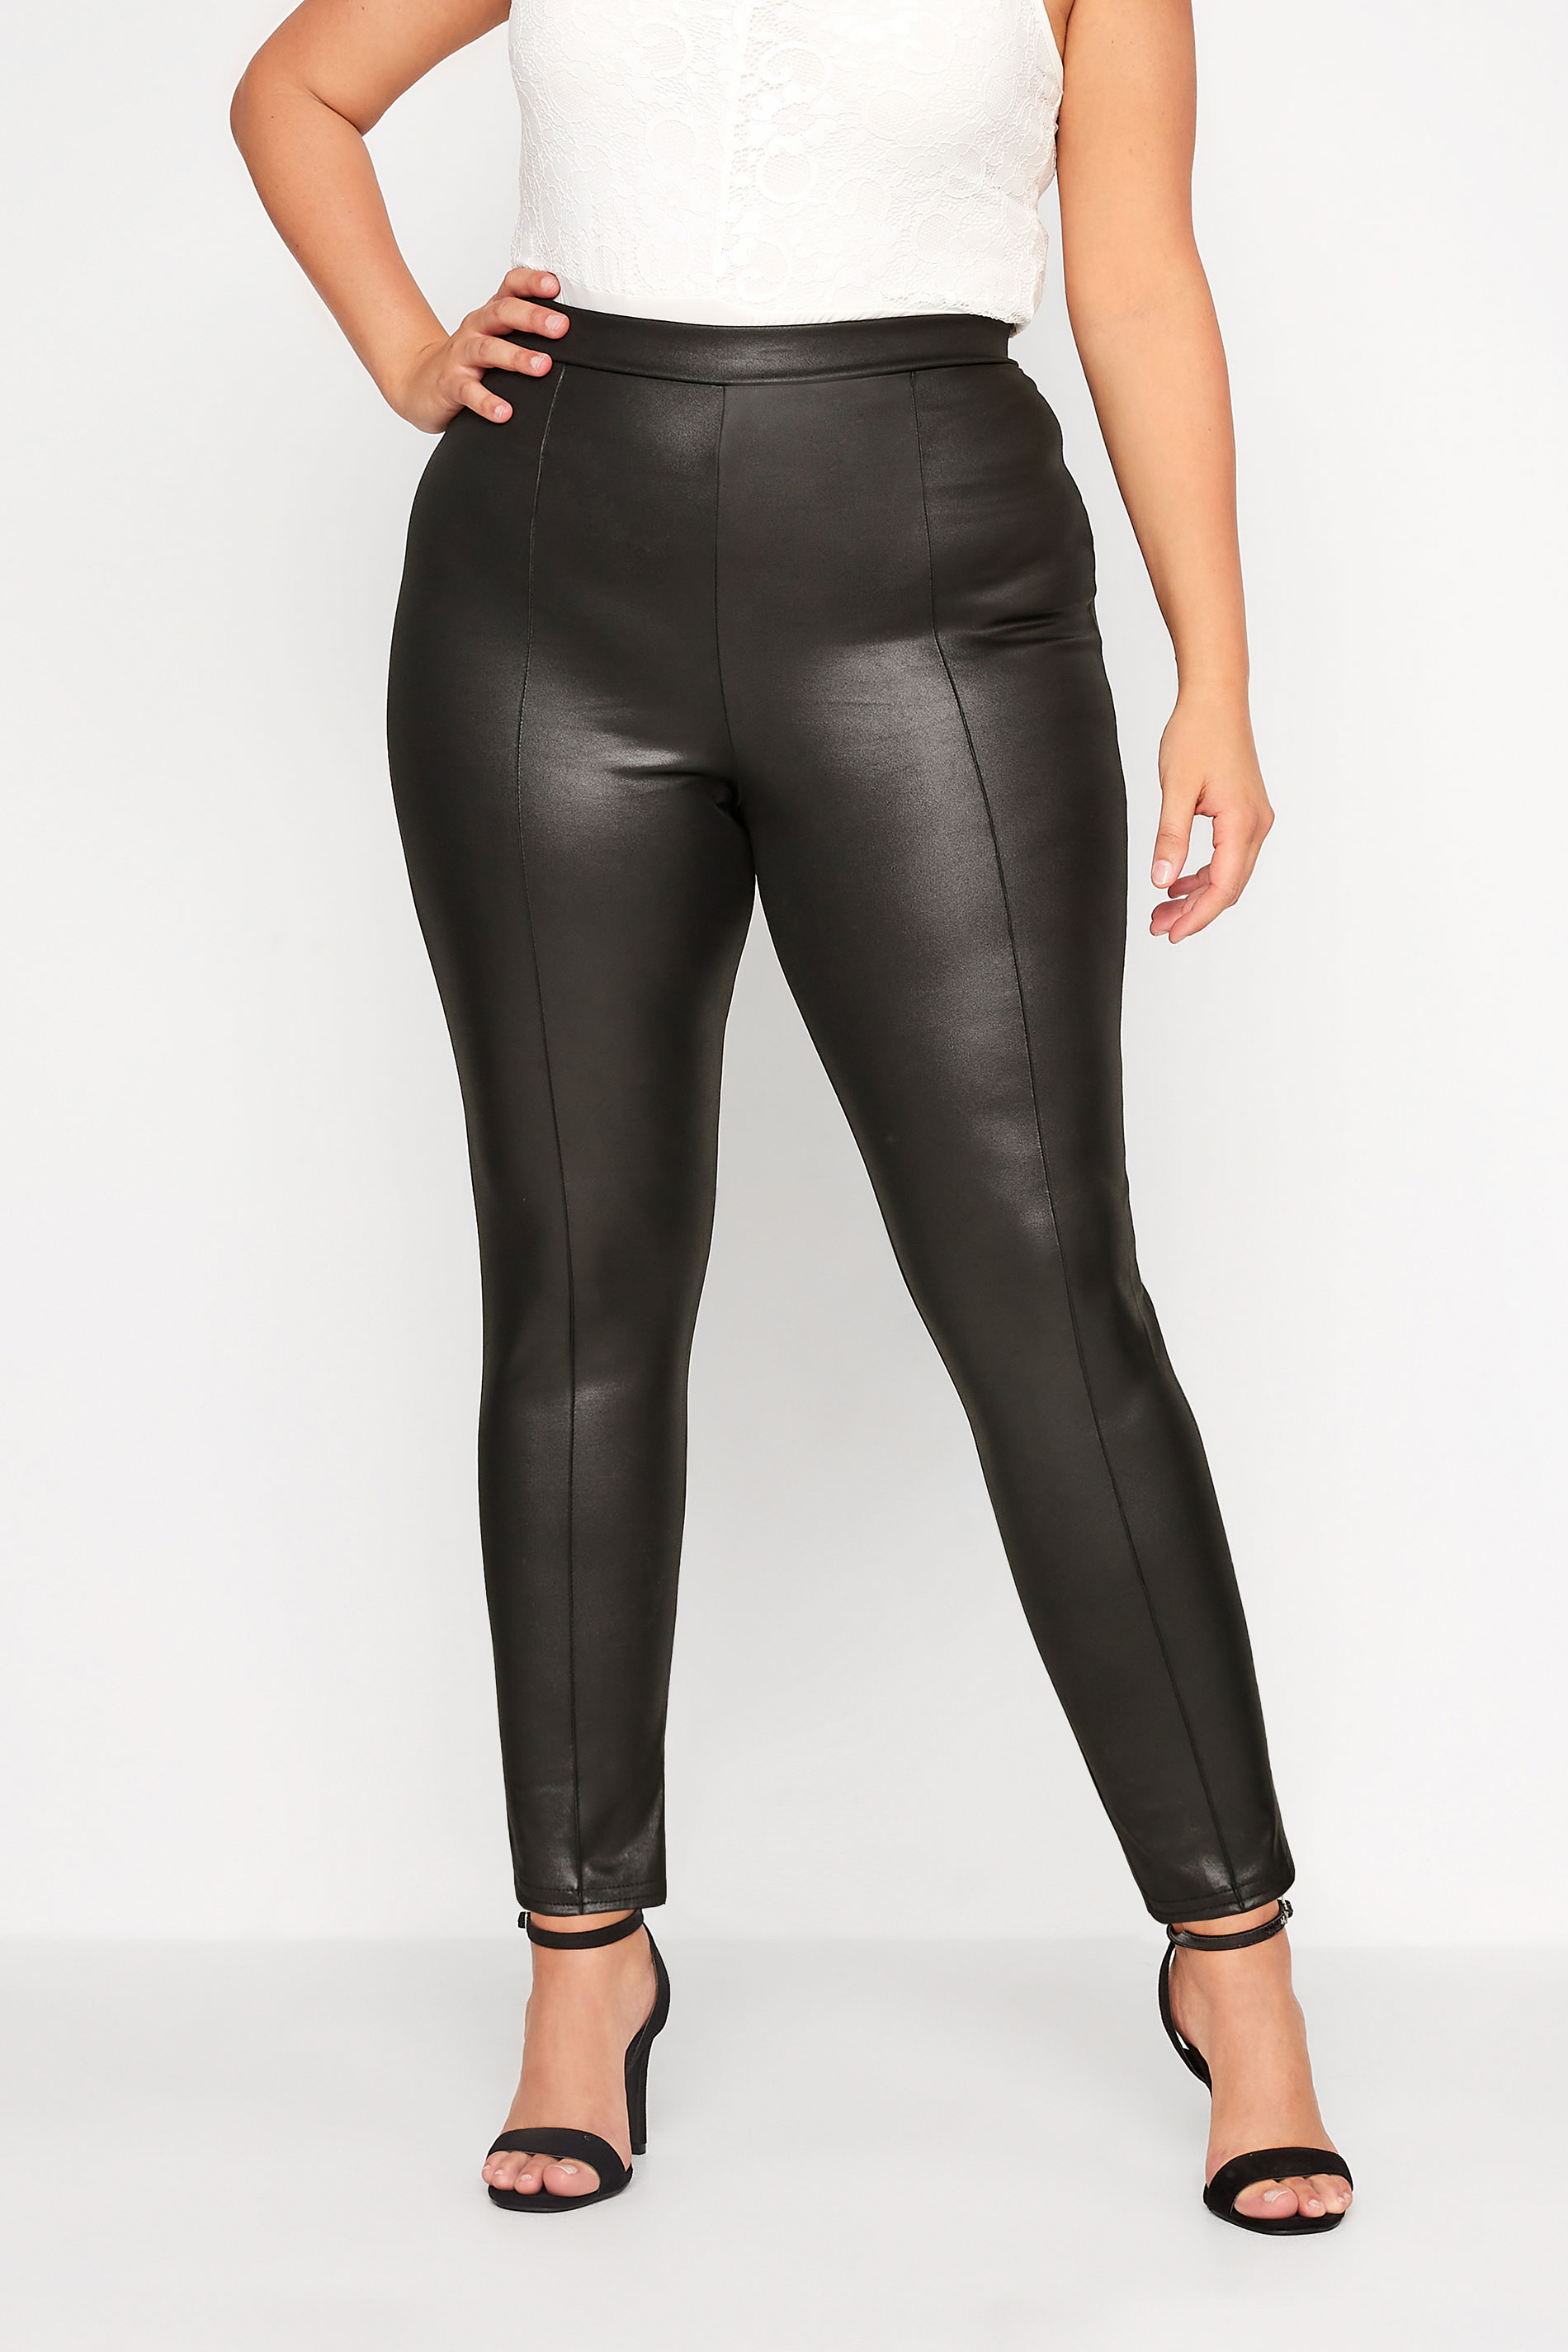 YOURS LONDON Curve Black Front Seam Leather Look Leggings 1